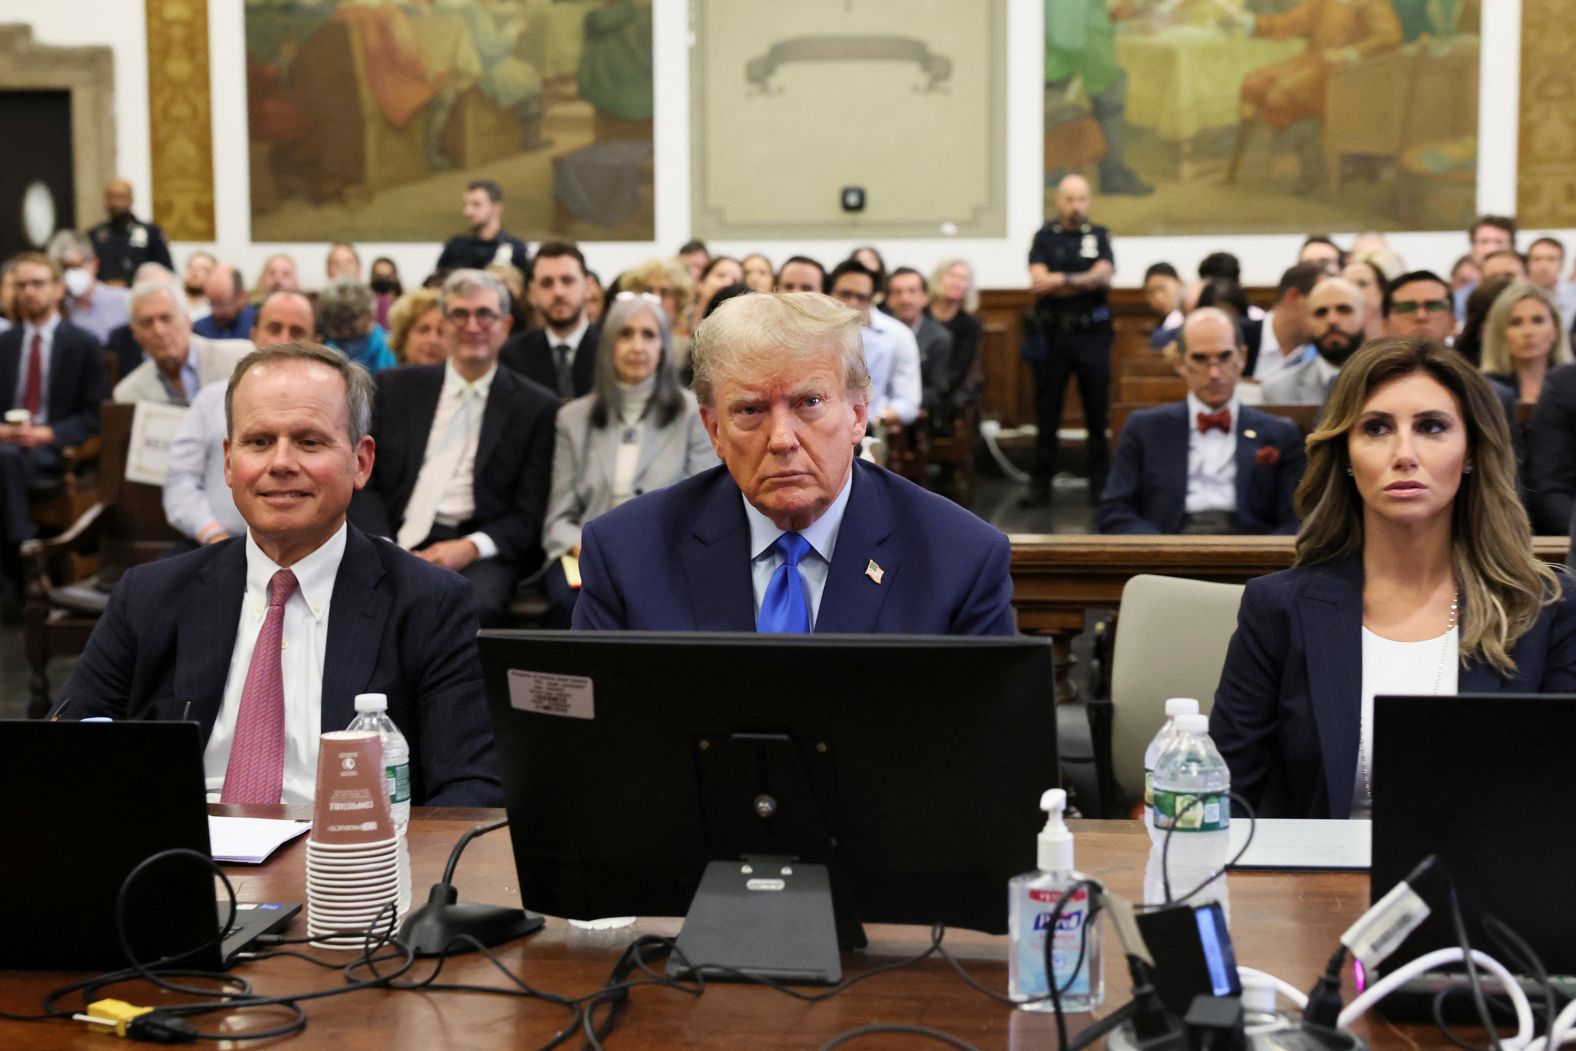 Trump sits in the courtroom on October 2, the first day of the trial.